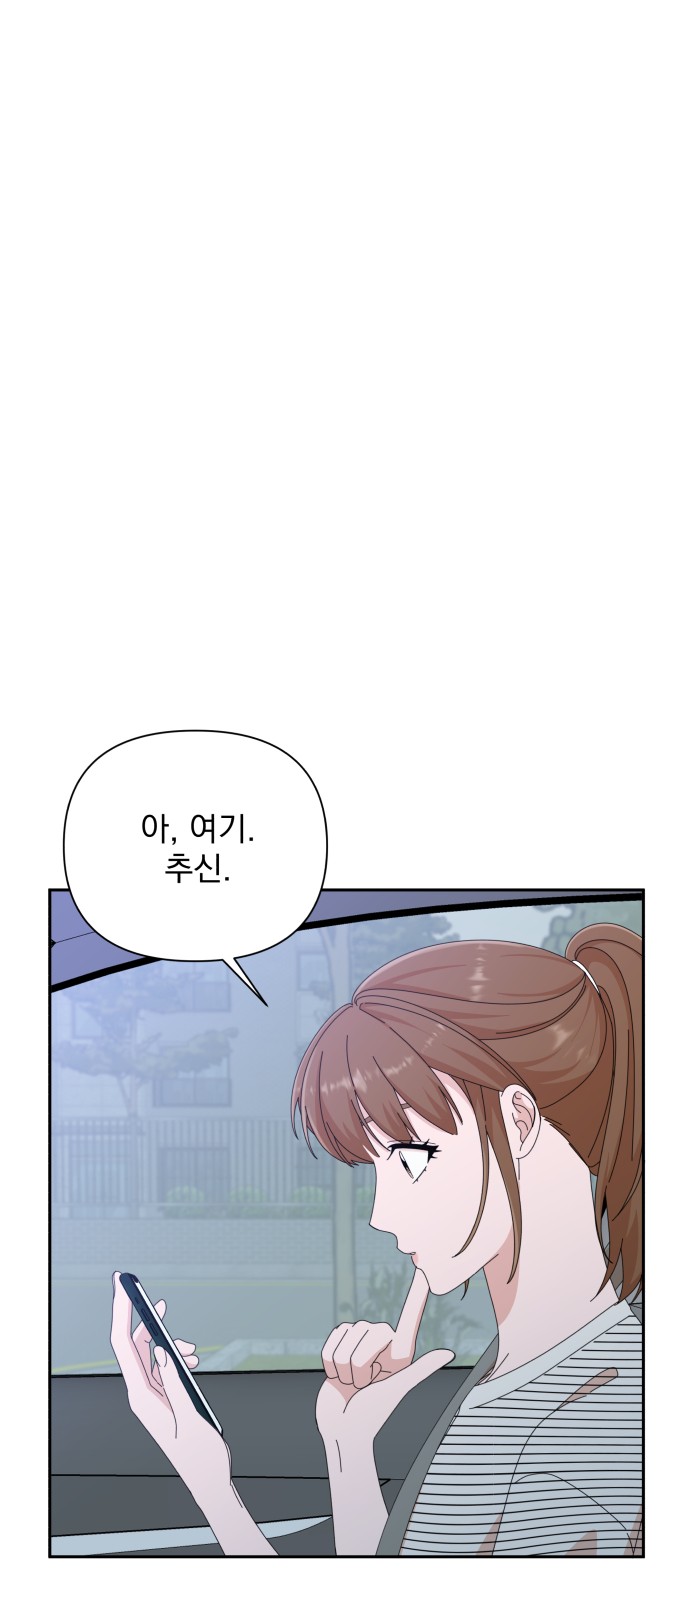 The Man With Pretty Lips - Chapter 34 - Page 1